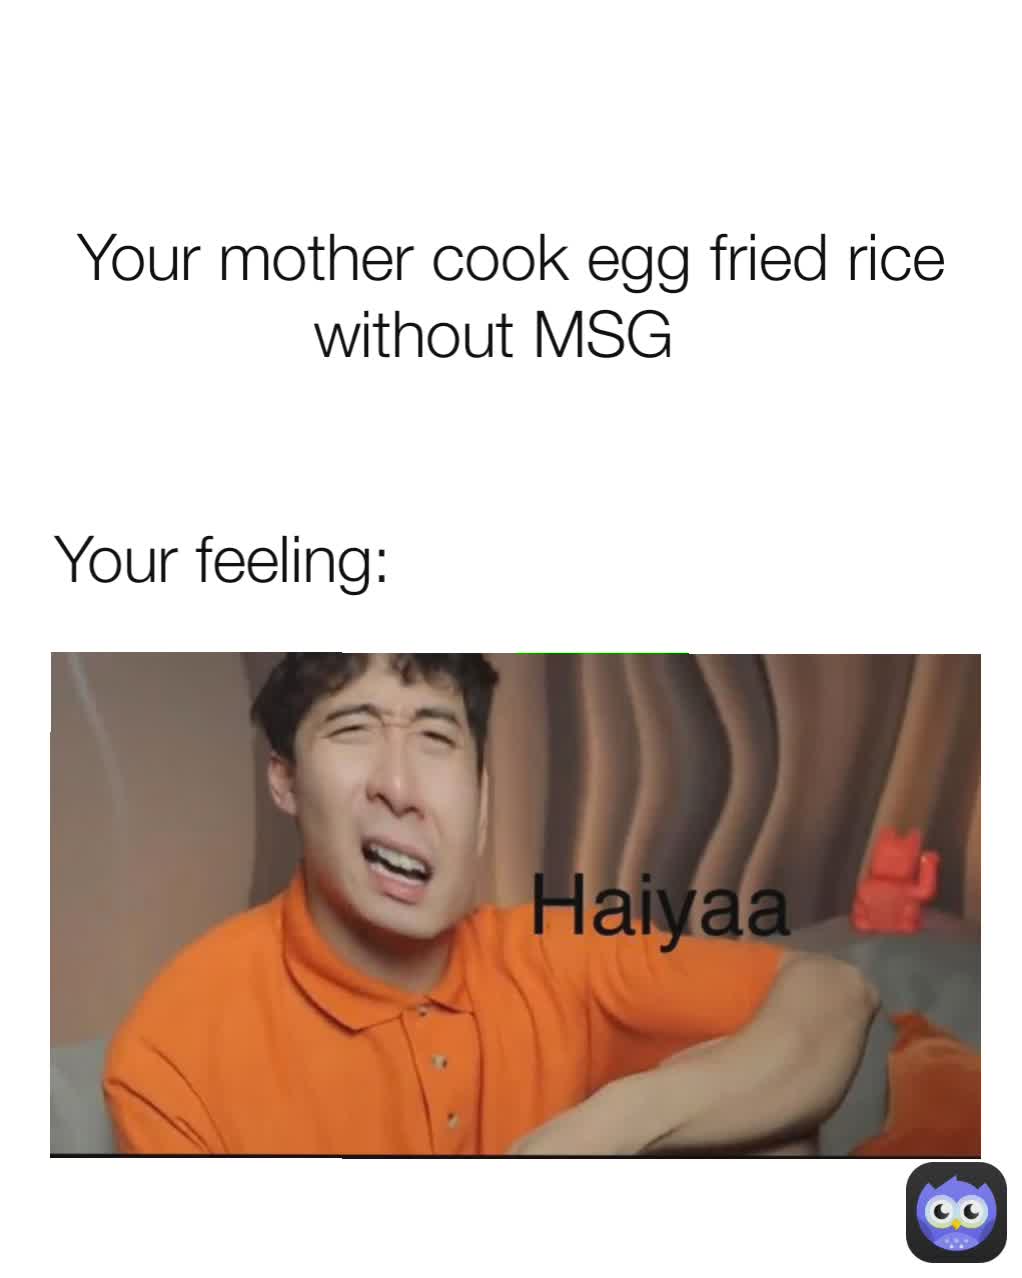  Your mother cook egg fried rice without MSG  Your feeling: